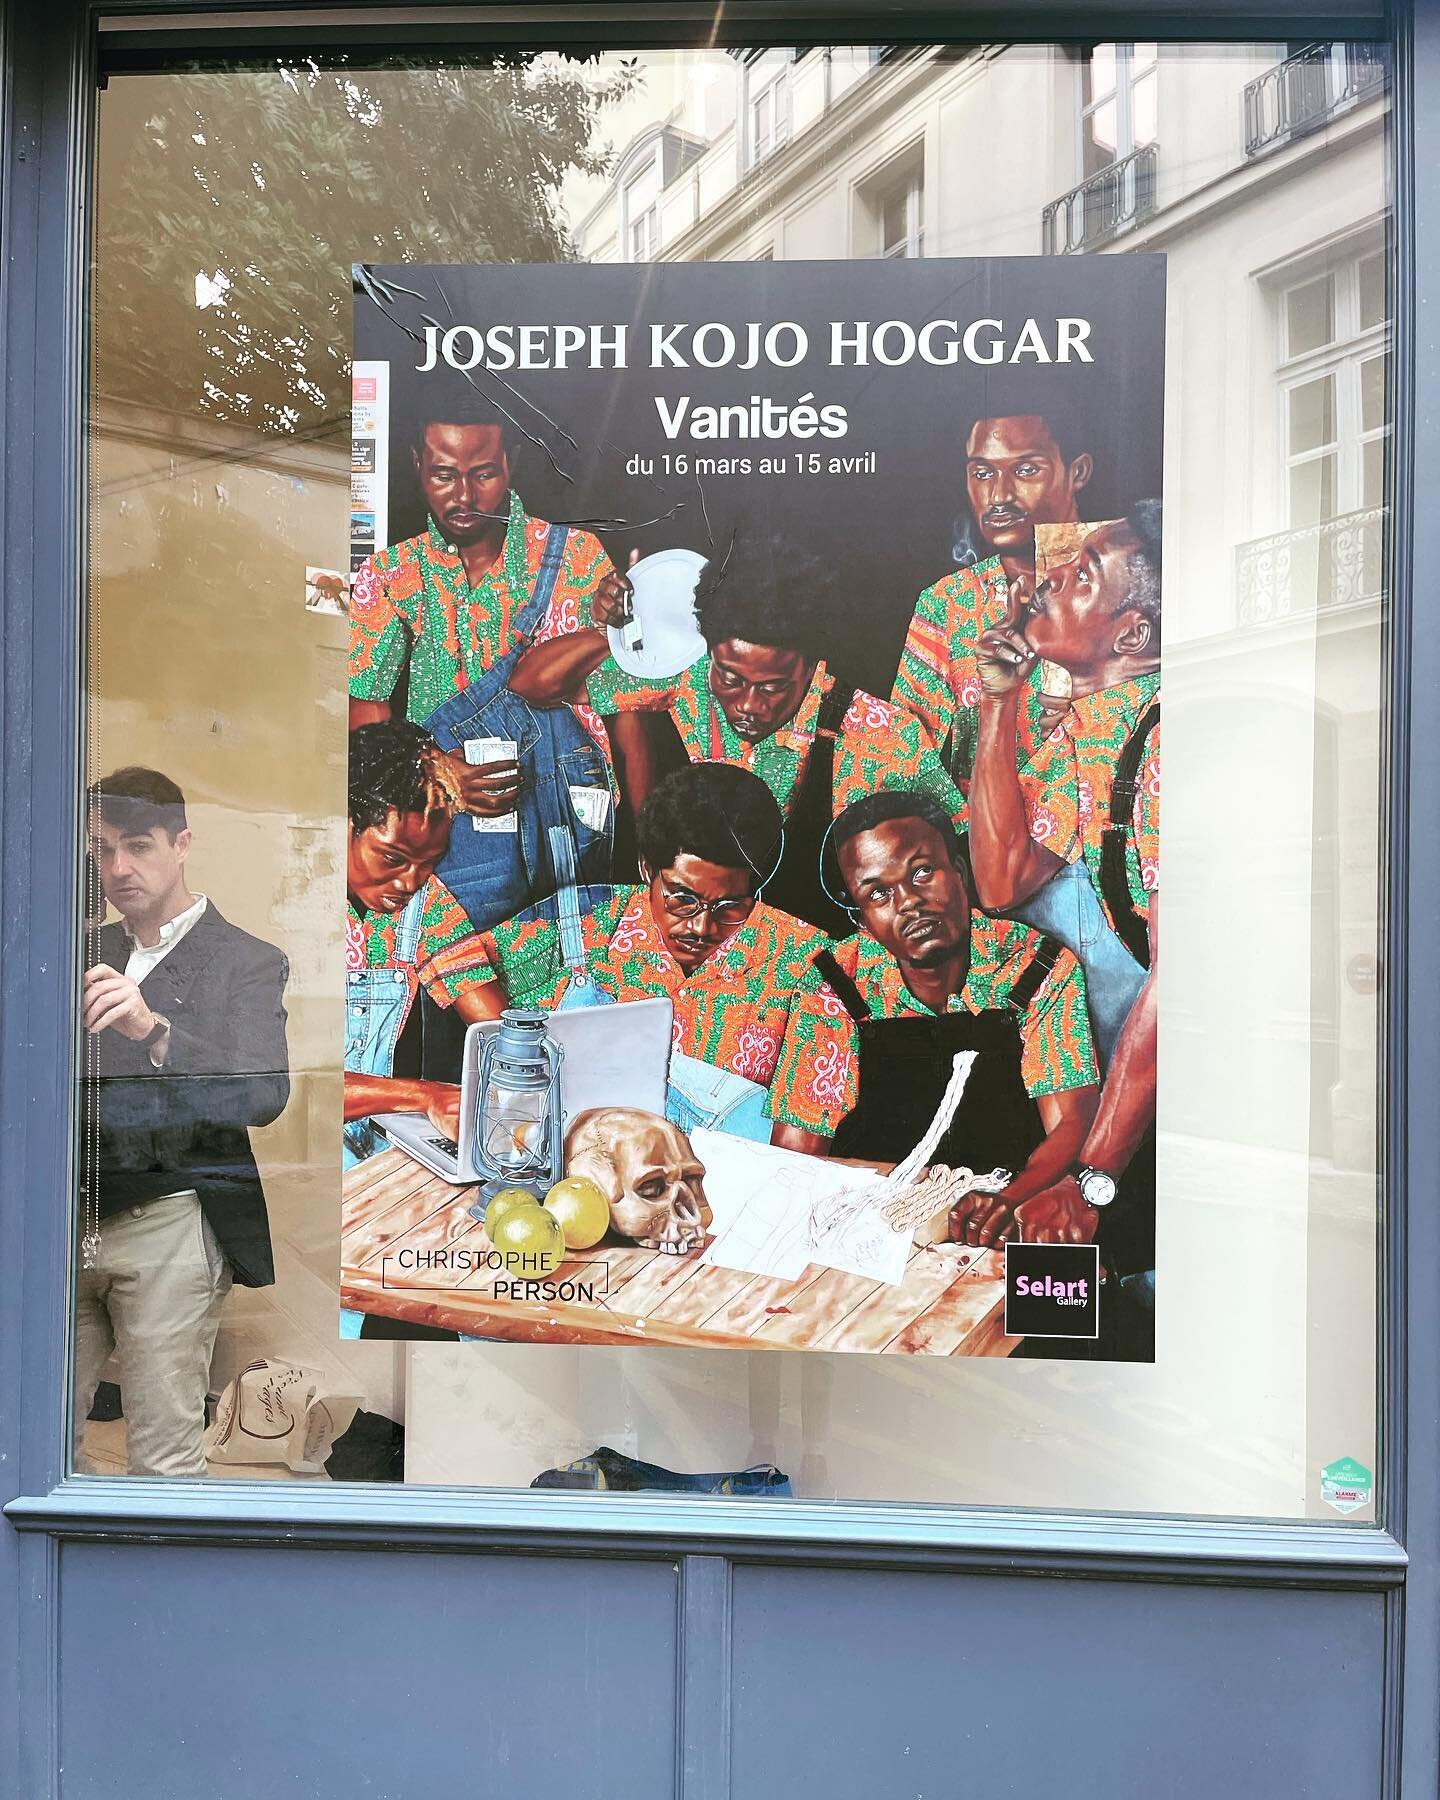 Strolling through the Marais I found the work of Ghanaian artist Joseph Kojo Hogger at Christophe Person Gallery. Not to miss. He is an incredible talent. #parisgalleries #inspiration #creativeprocess #collage #contemporarypainting #collectart #inter